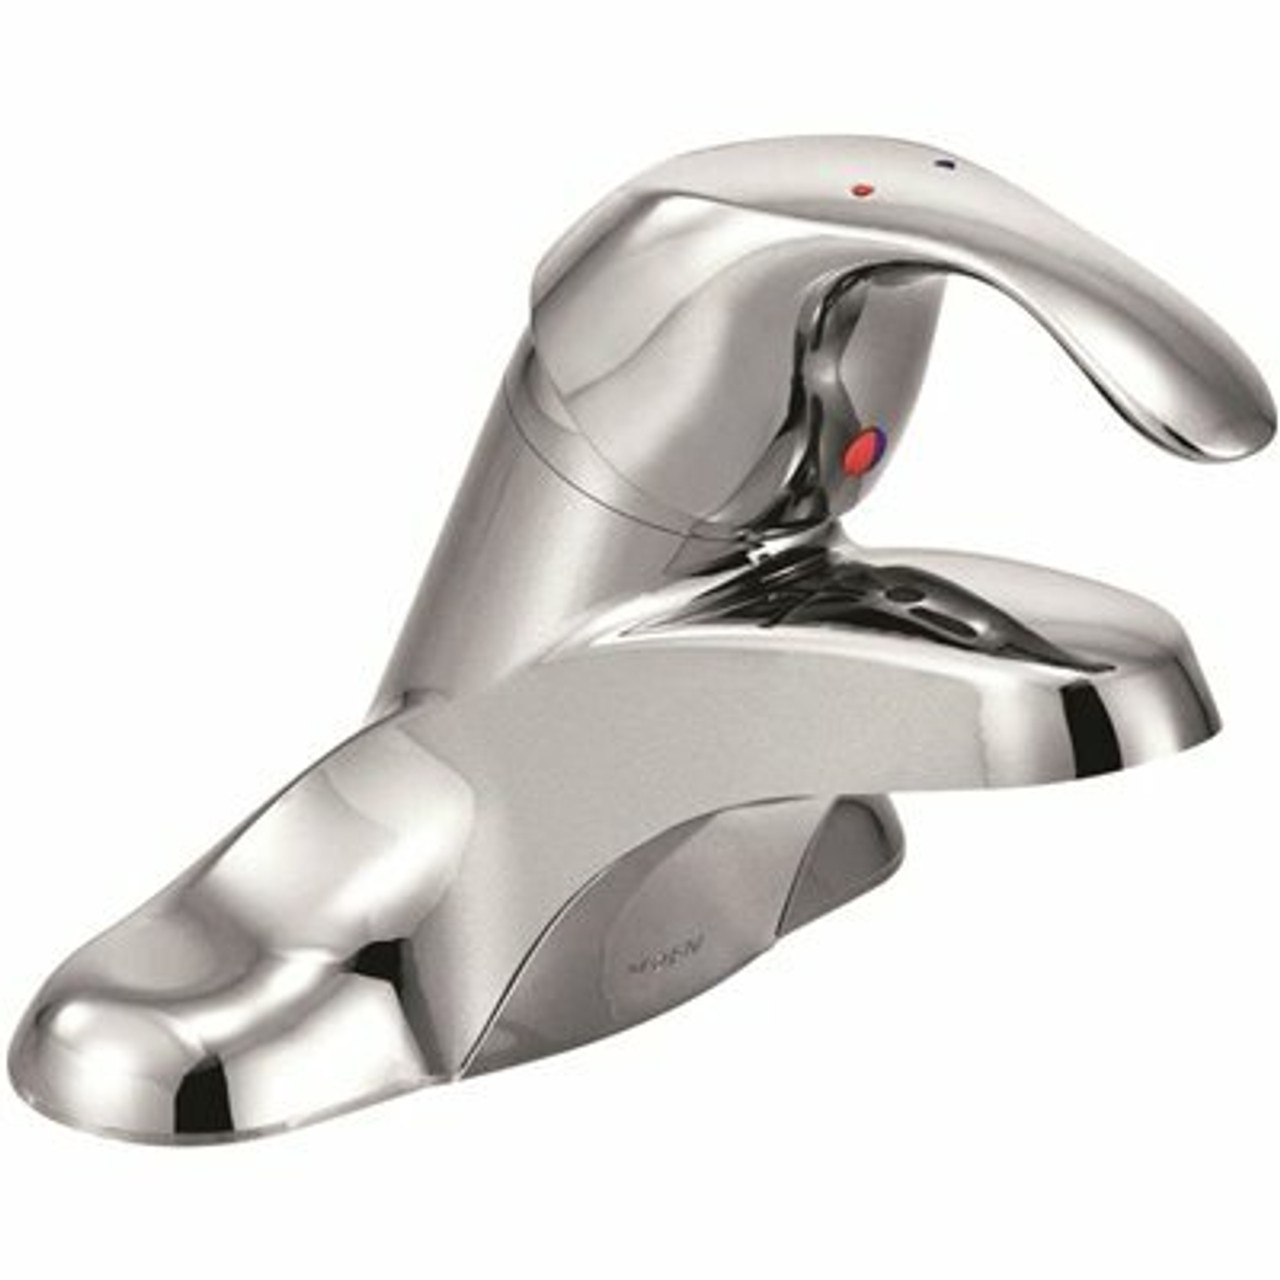 Moen Commercial 4 In. Centerset Single-Handle Low-Arc Bathroom Faucet In Chrome - 3558417